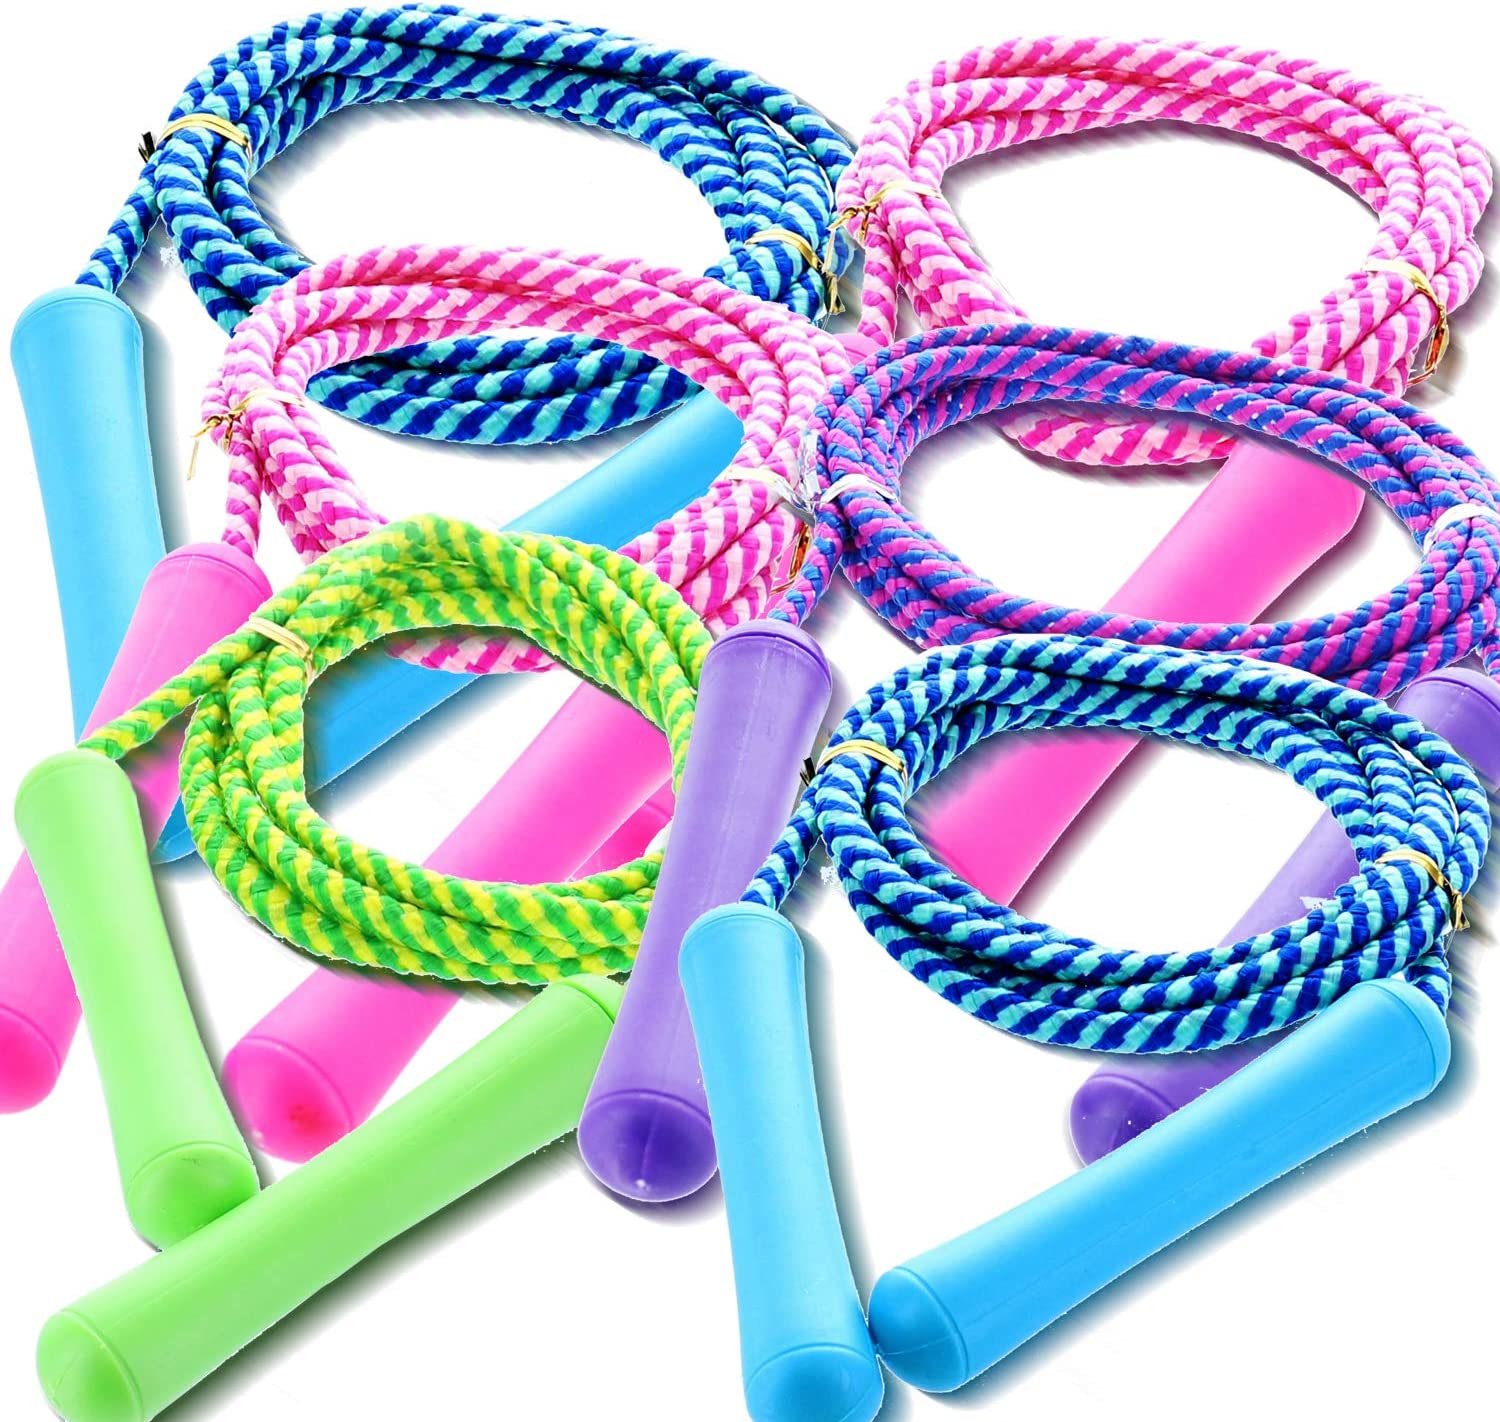 GiftExpress Adjustable Size Colorful Jump Rope for Kids and Teens – Outdoor Indoor Fun Games Skipping Rope Exercise Fitness Activity and Party Favor – Assorted Colors Pack of (6)